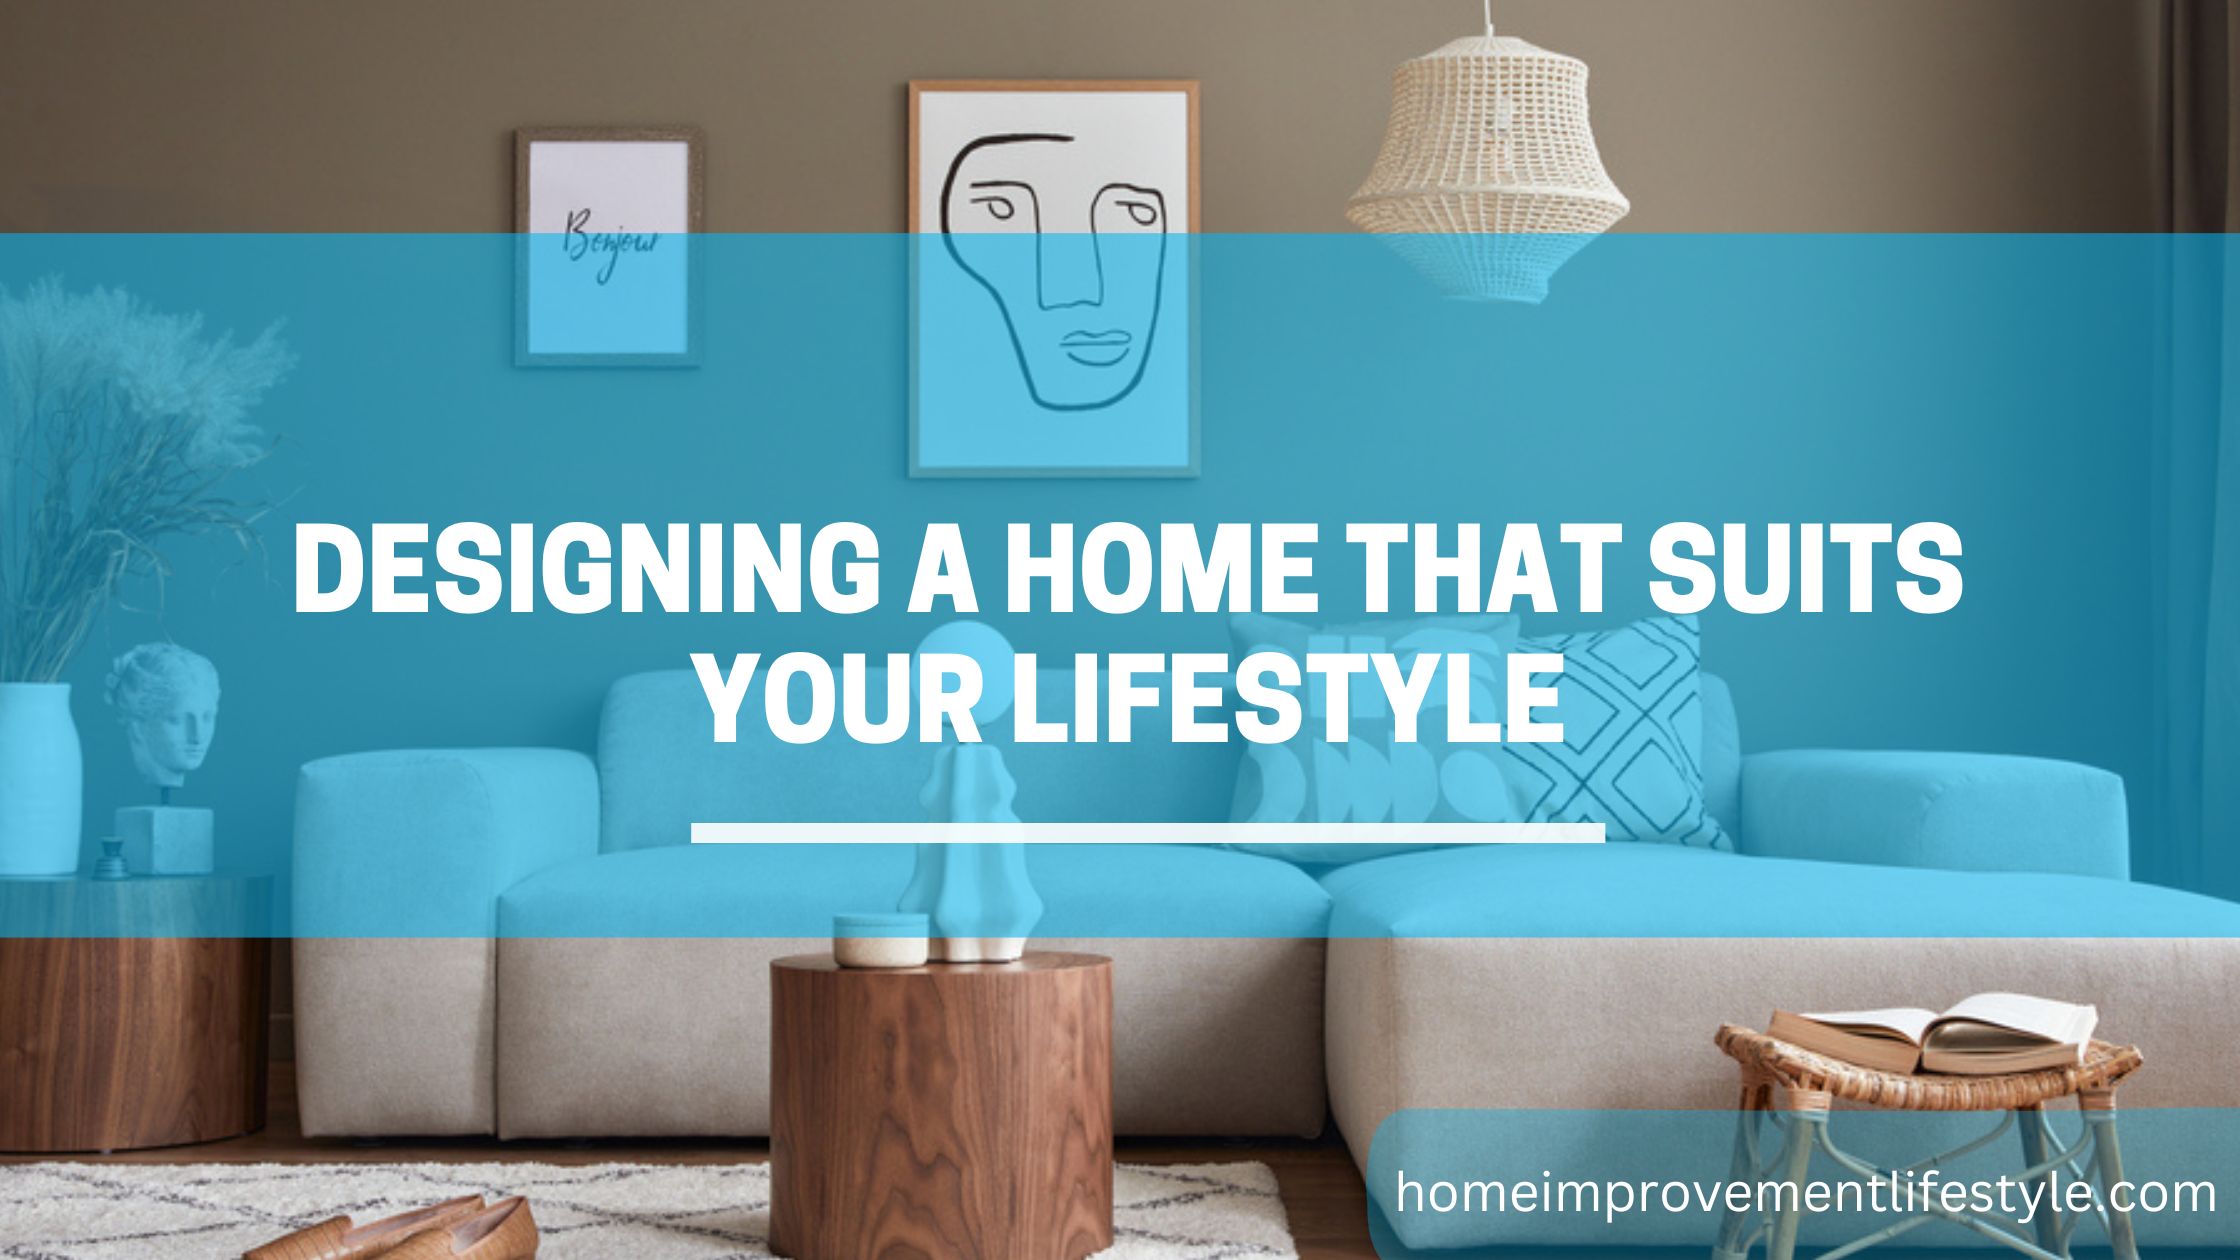 Designing a Home That Suits Your Lifestyle